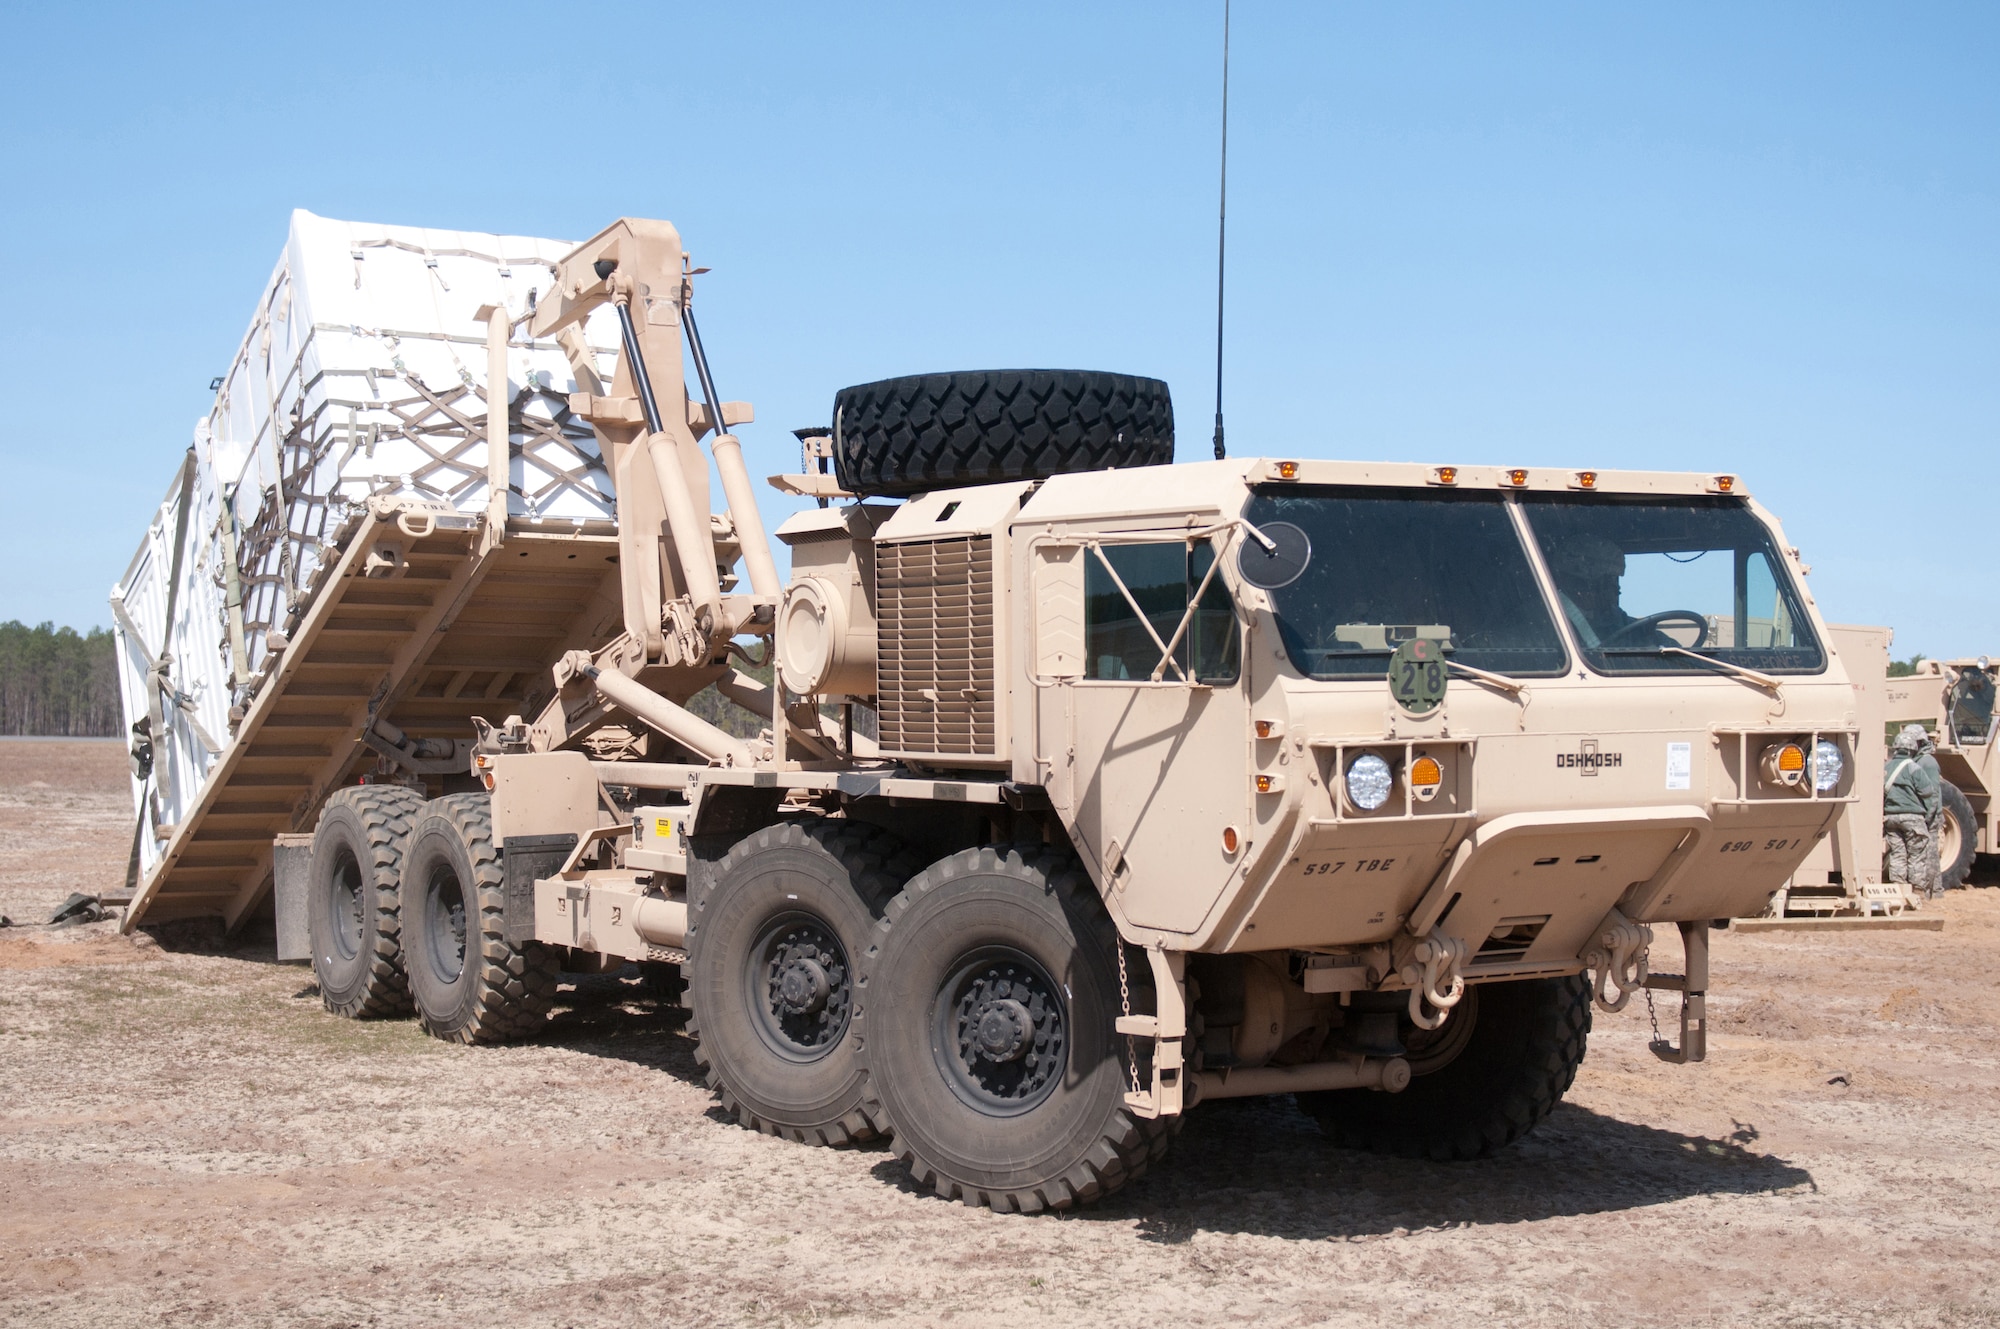 A U.S. Army Soldier from the 690th Rapid Port Opening Element loads a cargo container onto an M11-20 Heavy Expanded Mobility Tactical Truck in the marshaling yard at Lakehurst Naval Air Engineering Station, N.J., March 27, 2012. The cargo, which arrived by airlift earlier in the week, is being transported over land to a forward distribution node as part of a U.S. Transportation Command exercise designed to test the ability of the Kentucky Air National Guard’s 123rd Contingency Response Group to establish a Joint Task Force-Port Opening within 24 hours of arrival. (U.S. Air Force photo by Master Sgt. Phil Speck)